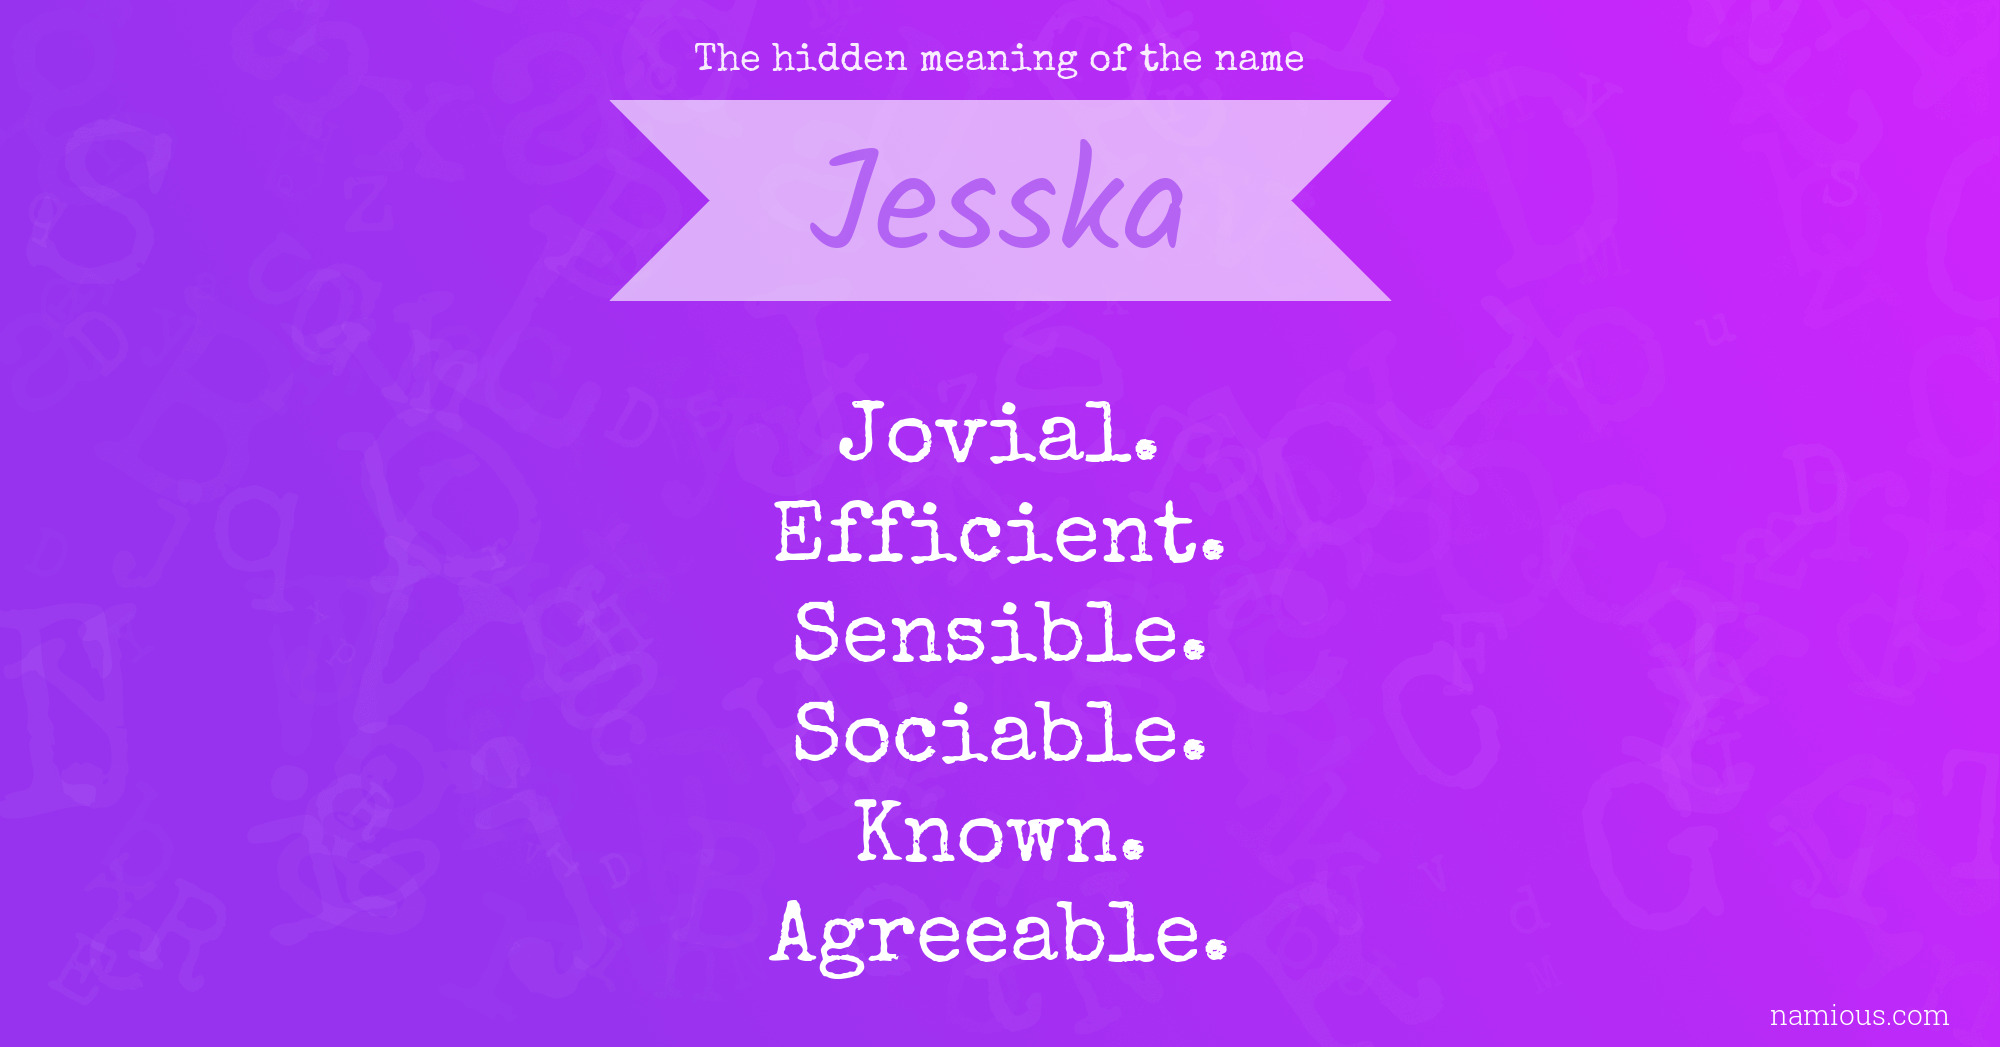 The hidden meaning of the name Jesska